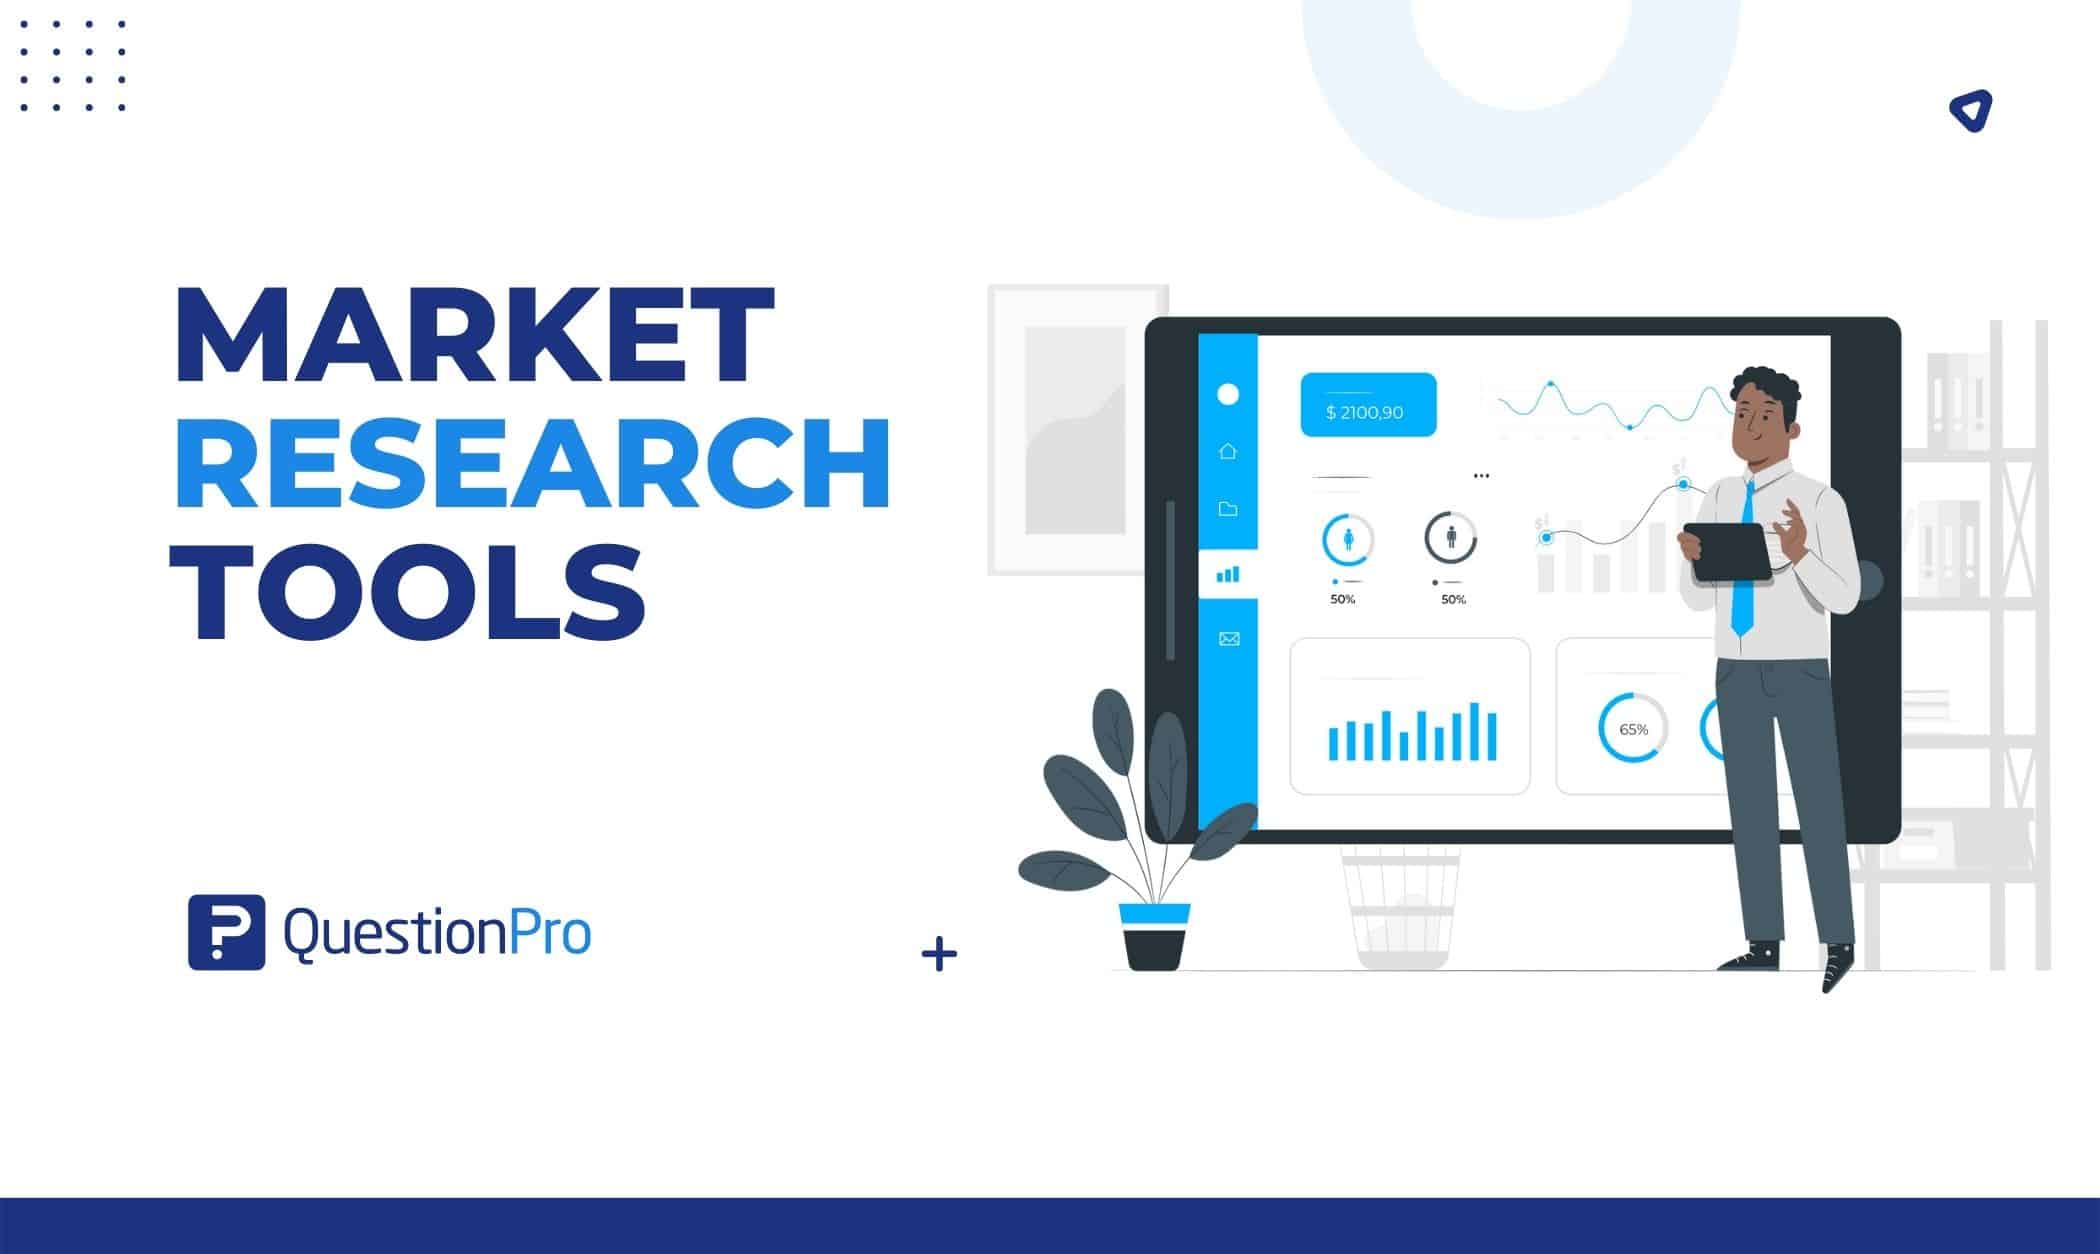 Market research increases profitability. We listed the 8 best market research tools to help you do market research and competitive analysis.